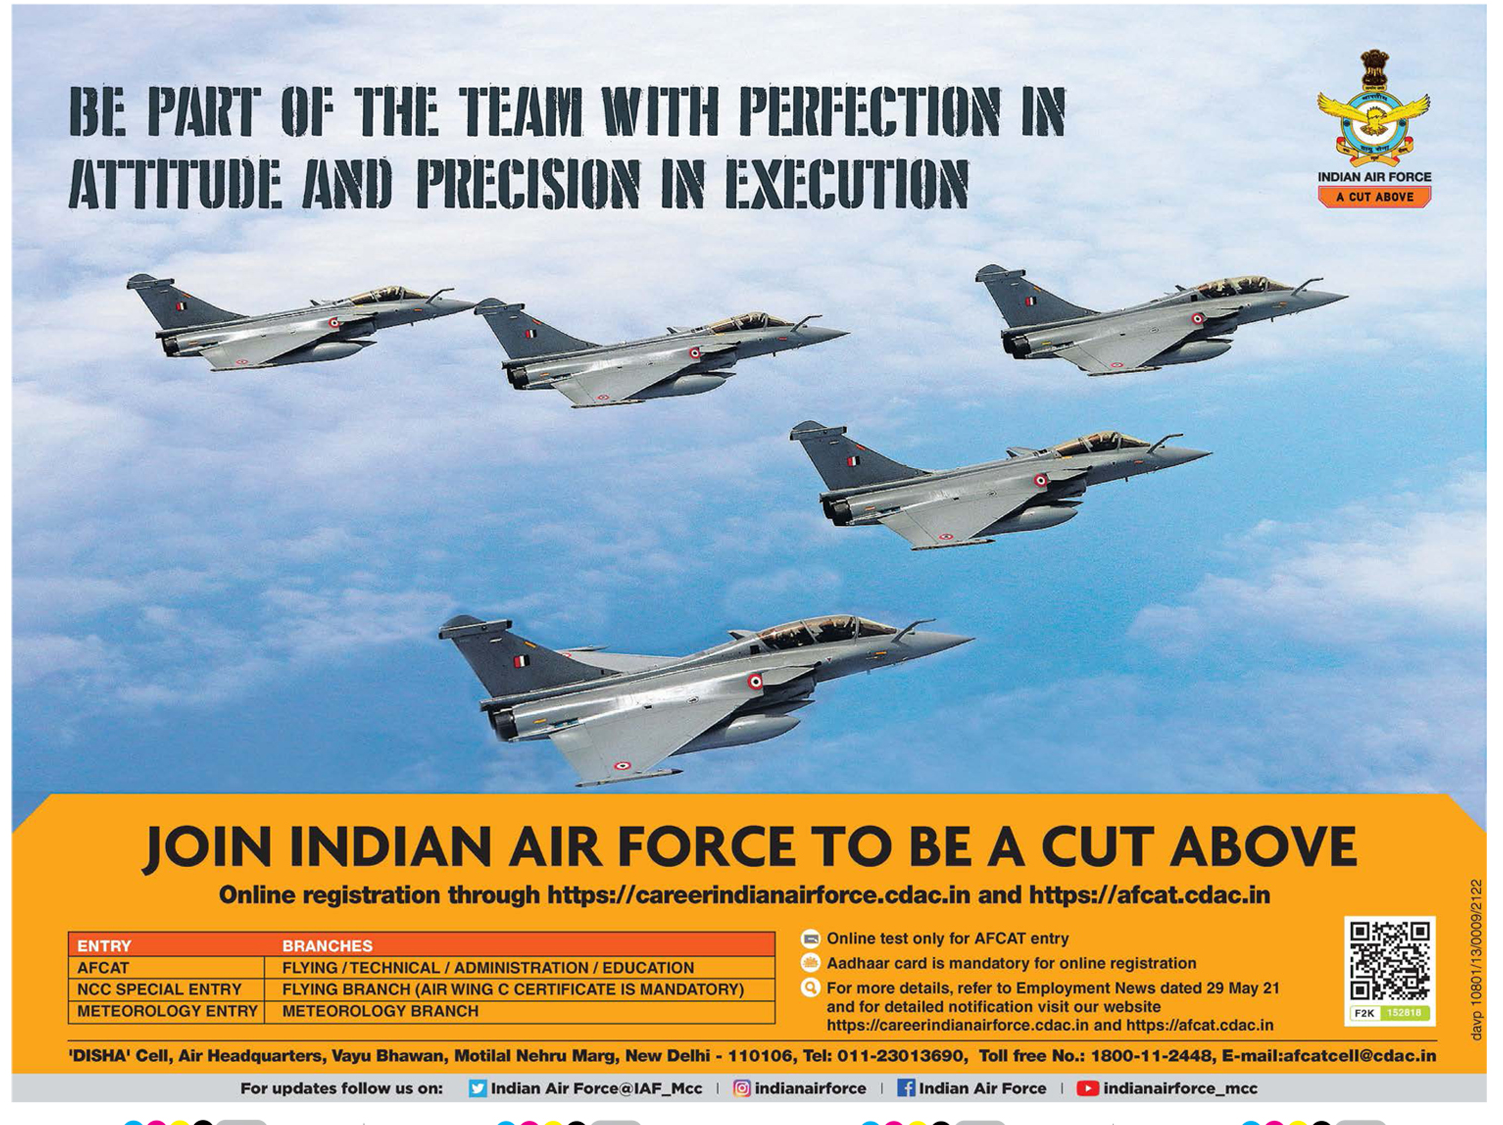 indian-air-force-be-part-of-the-team-with-perfection-in-attitude-and-precision-in-execution-ad-deccan-chronicle-hyderabad-27-06-2021